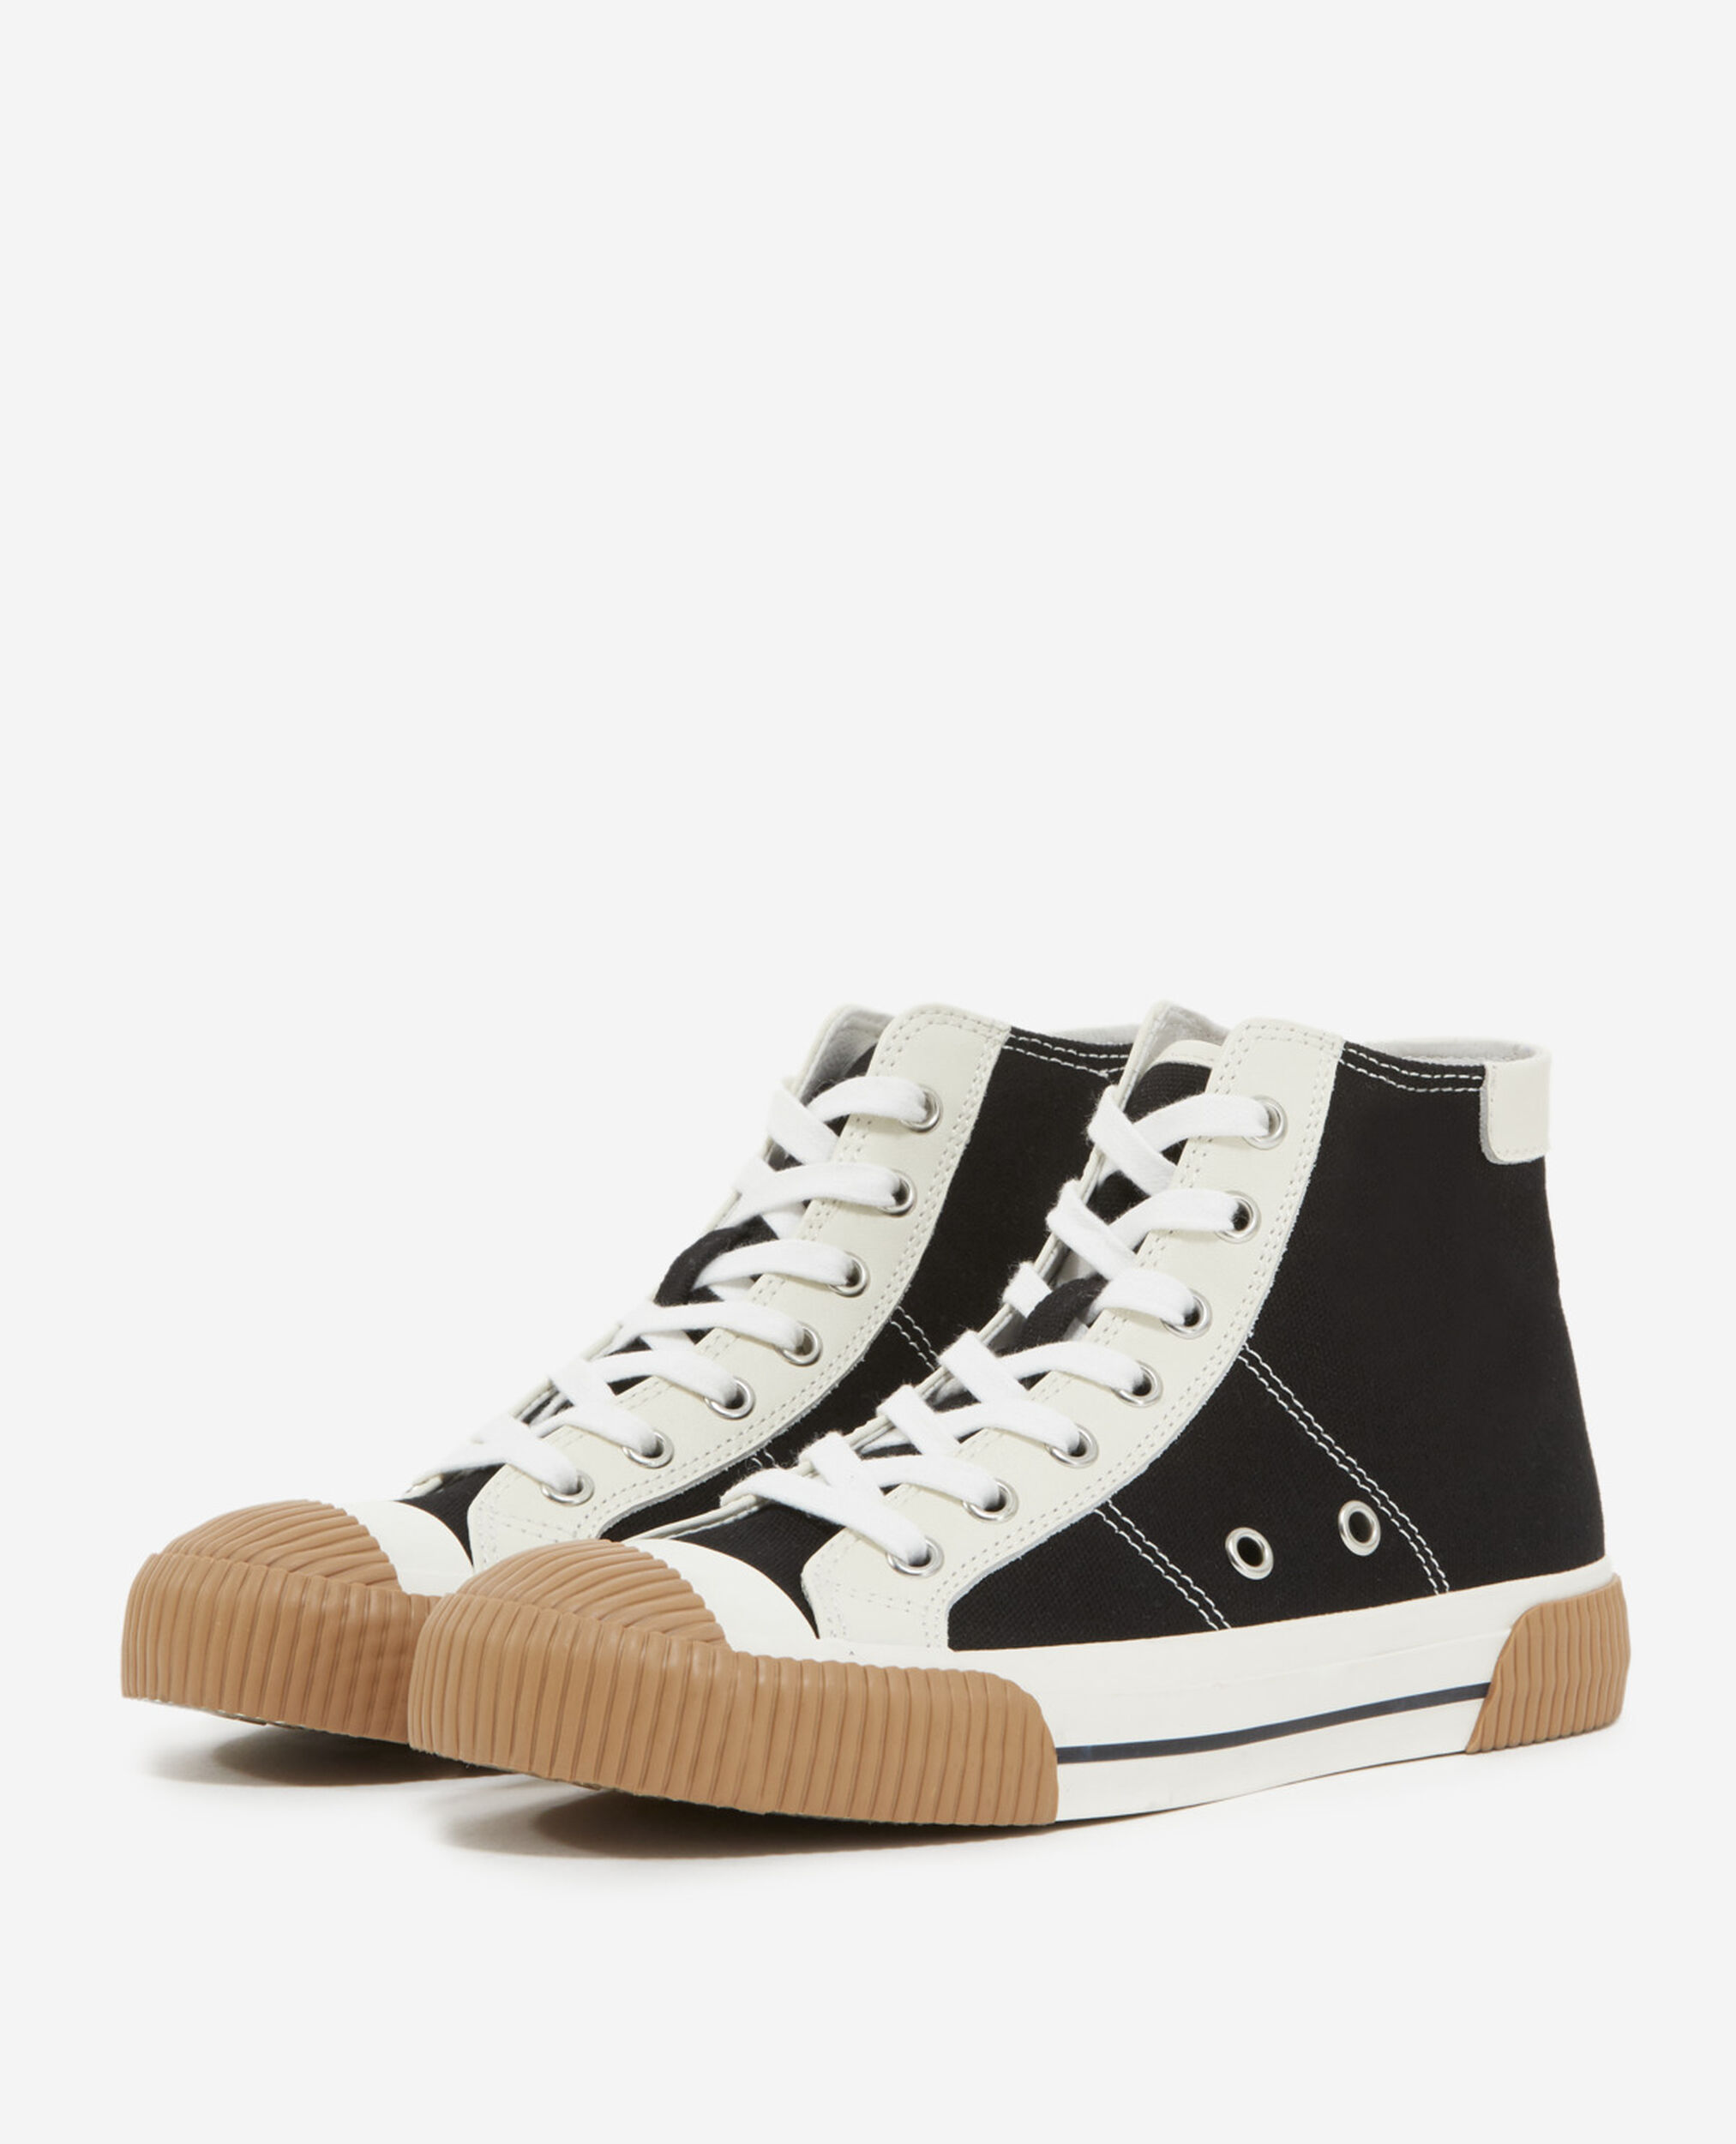 Black high-top lace-up canvas sneakers, BLACK, hi-res image number null